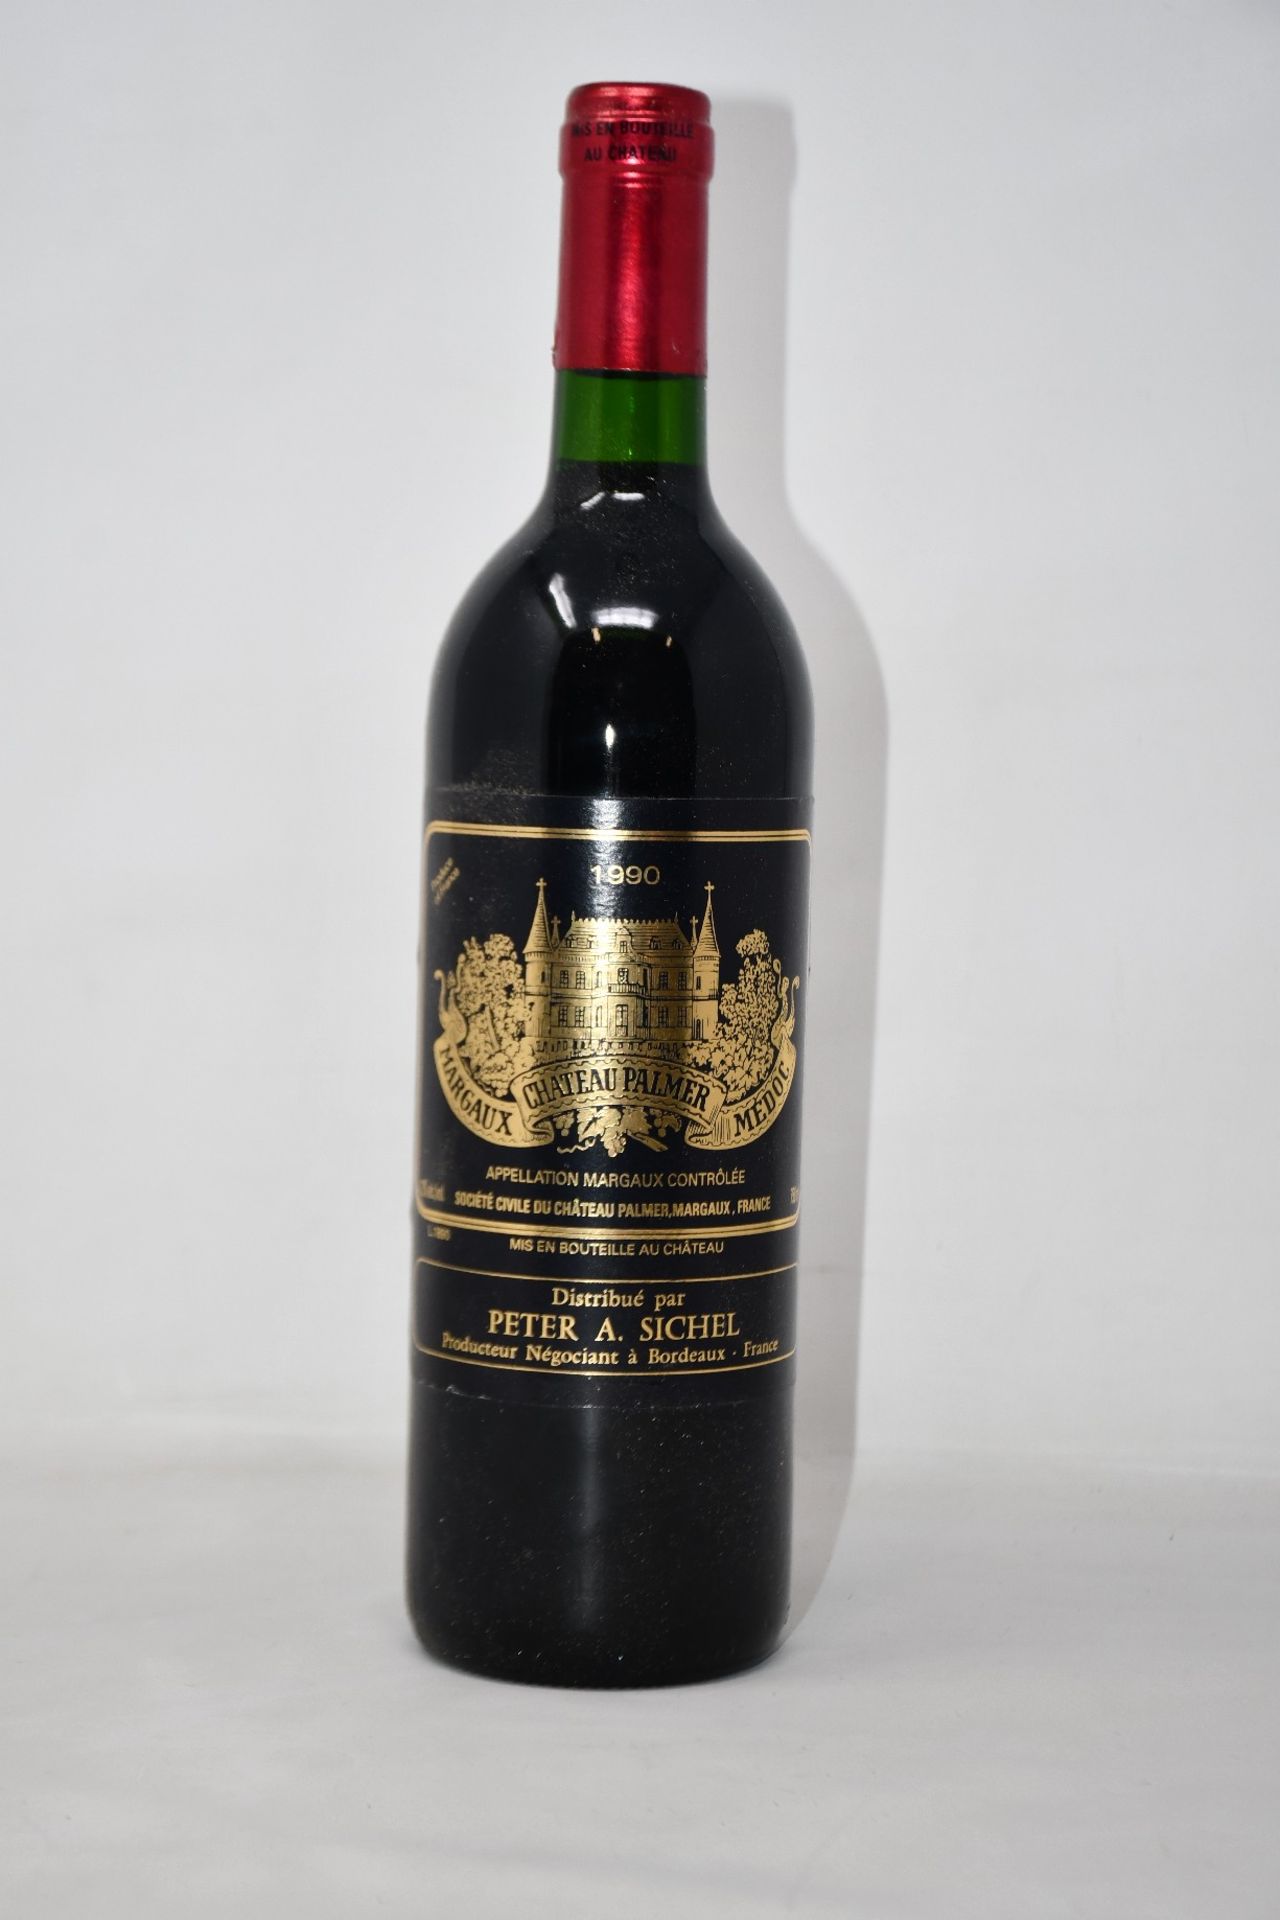 A bottle of 1990 Chateau Palmer Margeaux Medoc (Over 18s only).